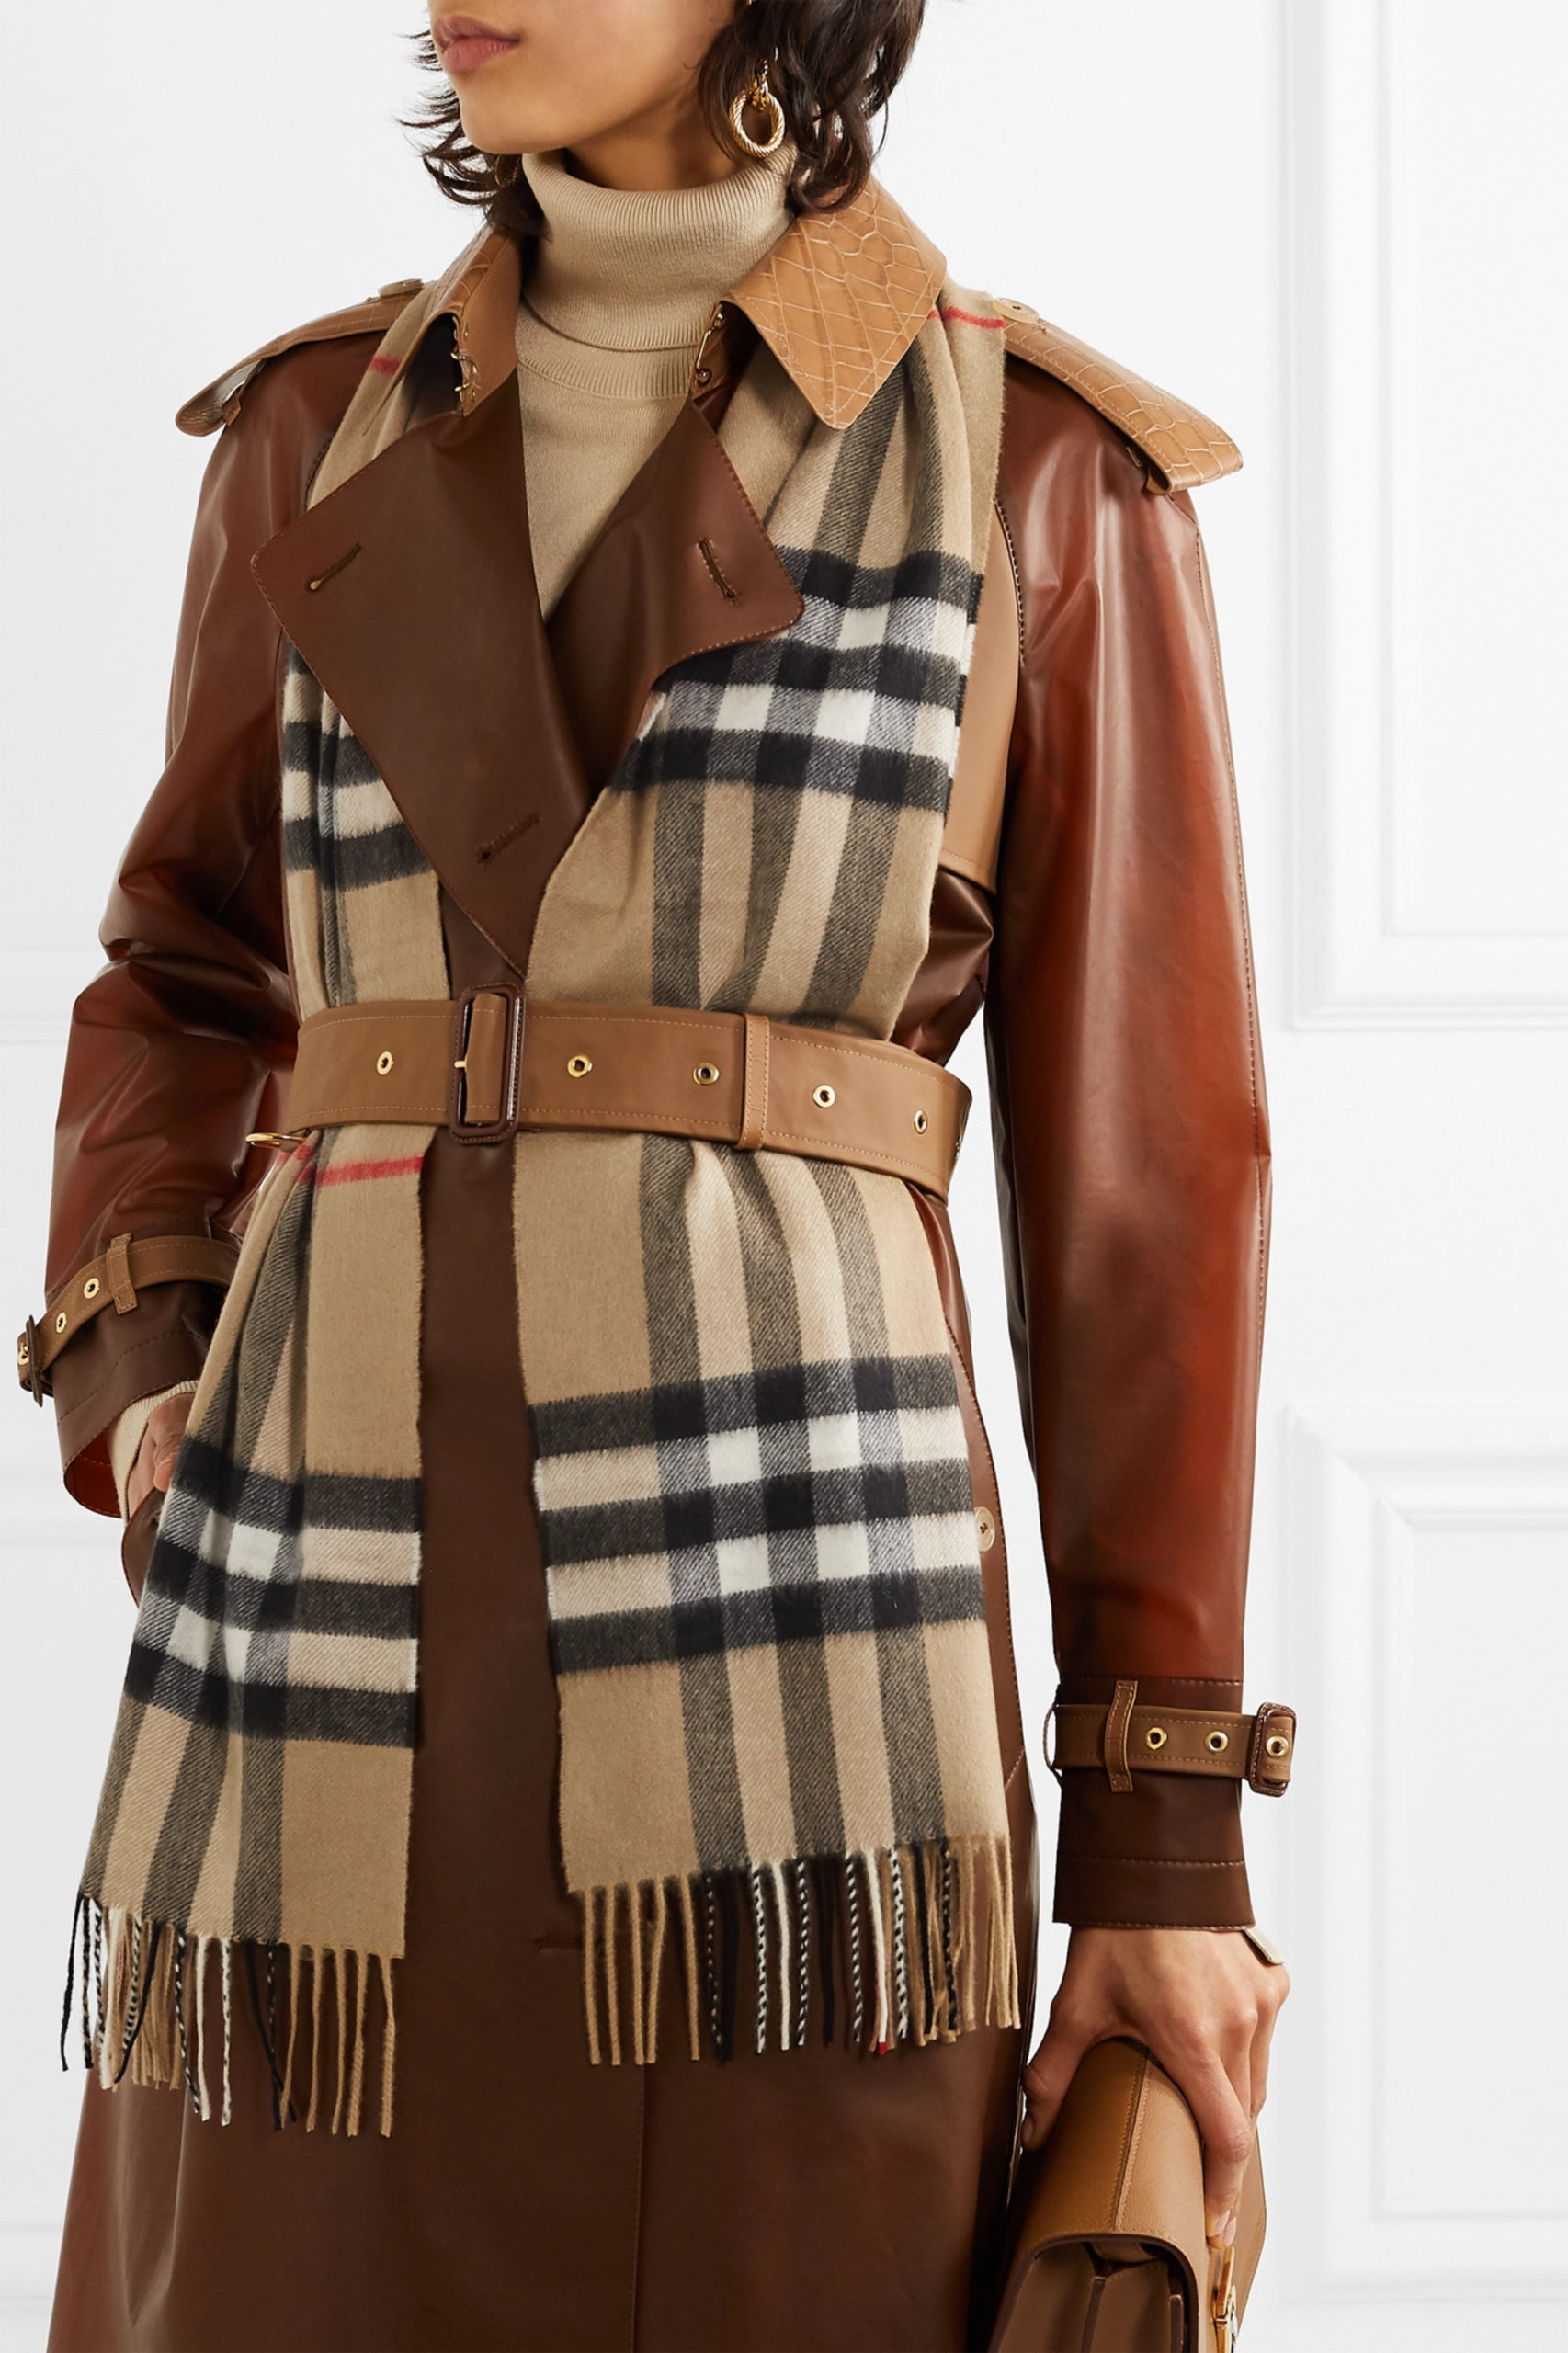 Burberry-Cashmere-Scarf-scaled Why I Love Burberry? 4 Must-Have Items For Every Fashionista